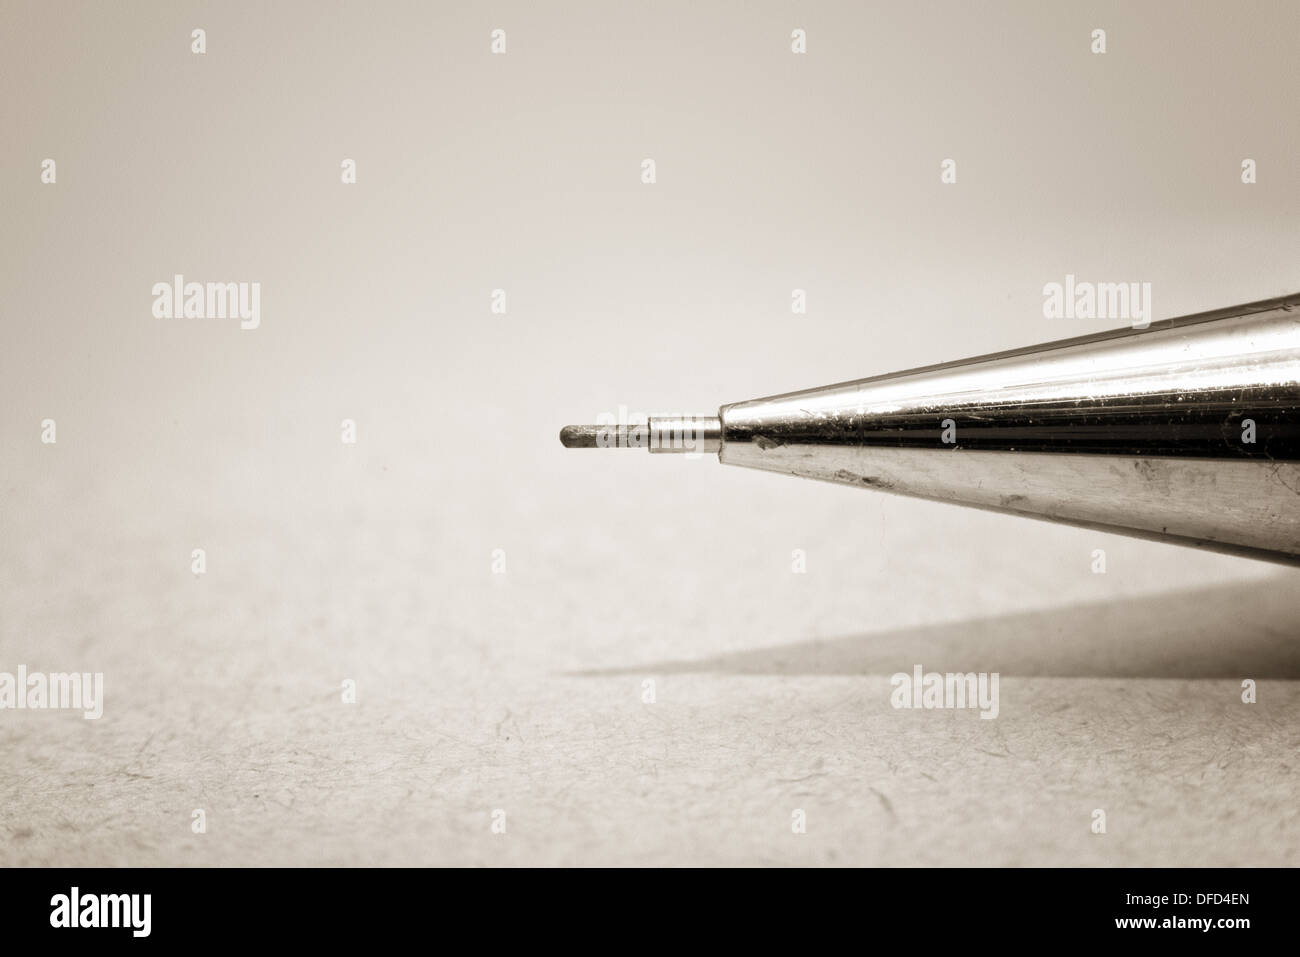 Tip of sharp mechanical pencil on paper Stock Photo